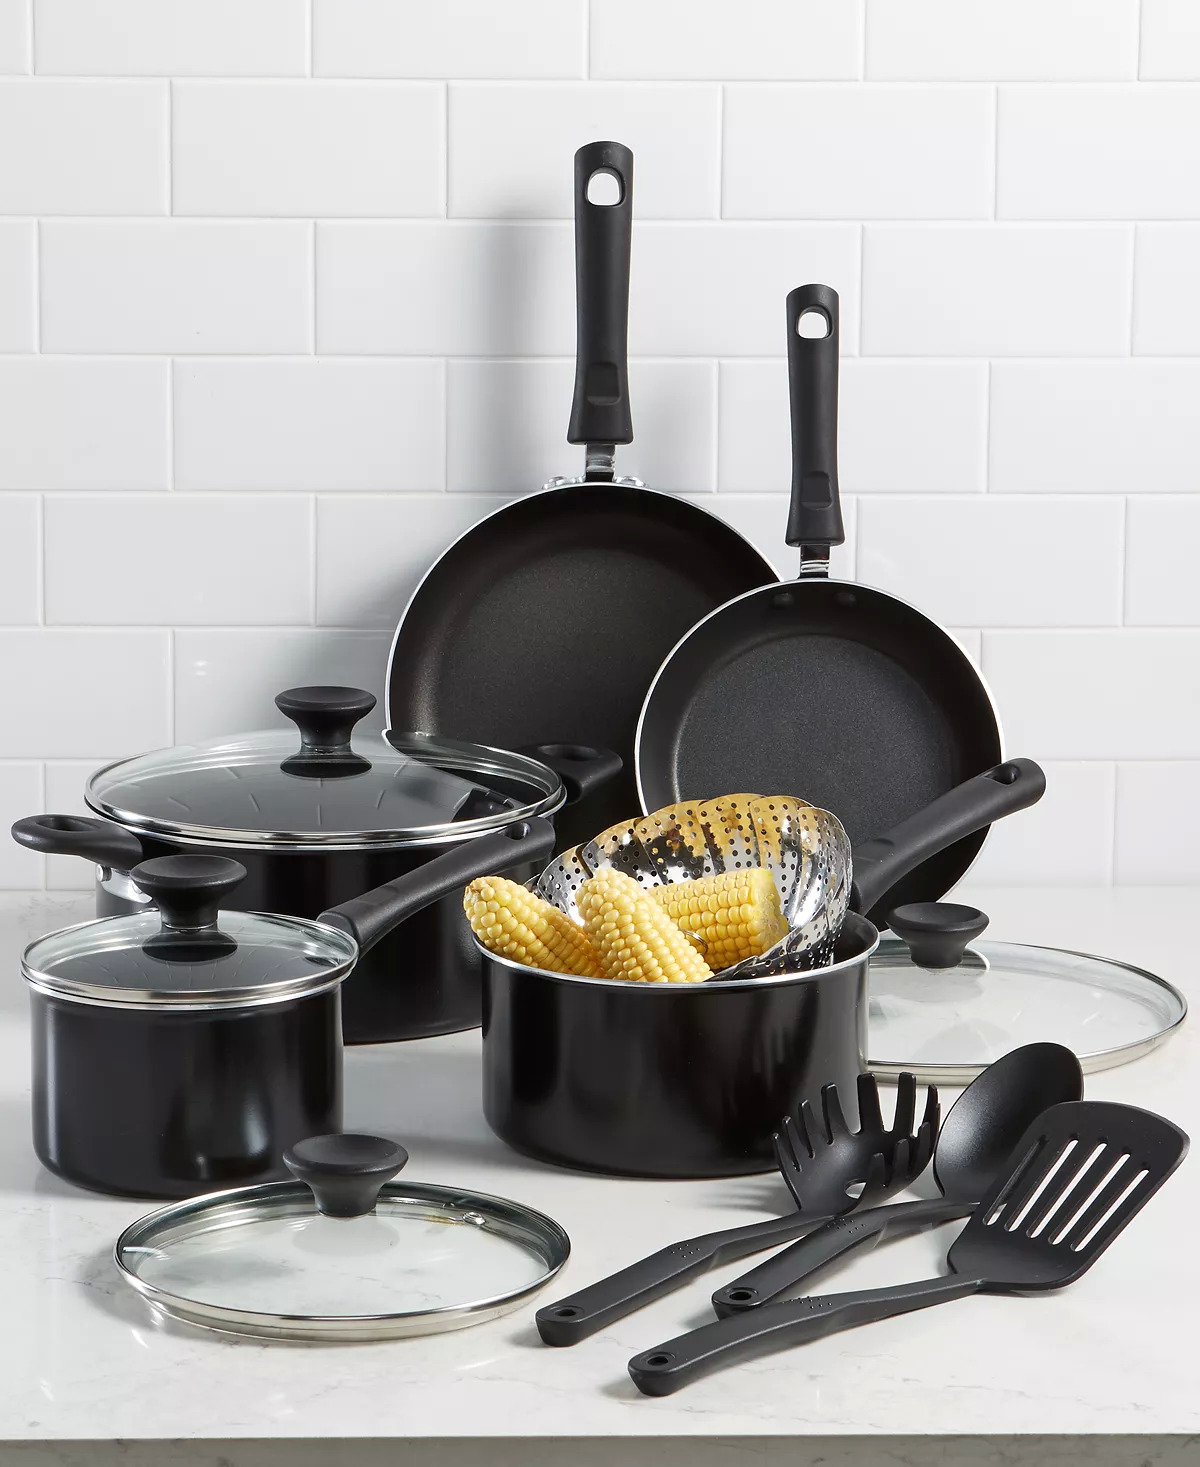 Tools of Trade Nonstick 13-Pc. Cookware Set $29.99 at Macy's